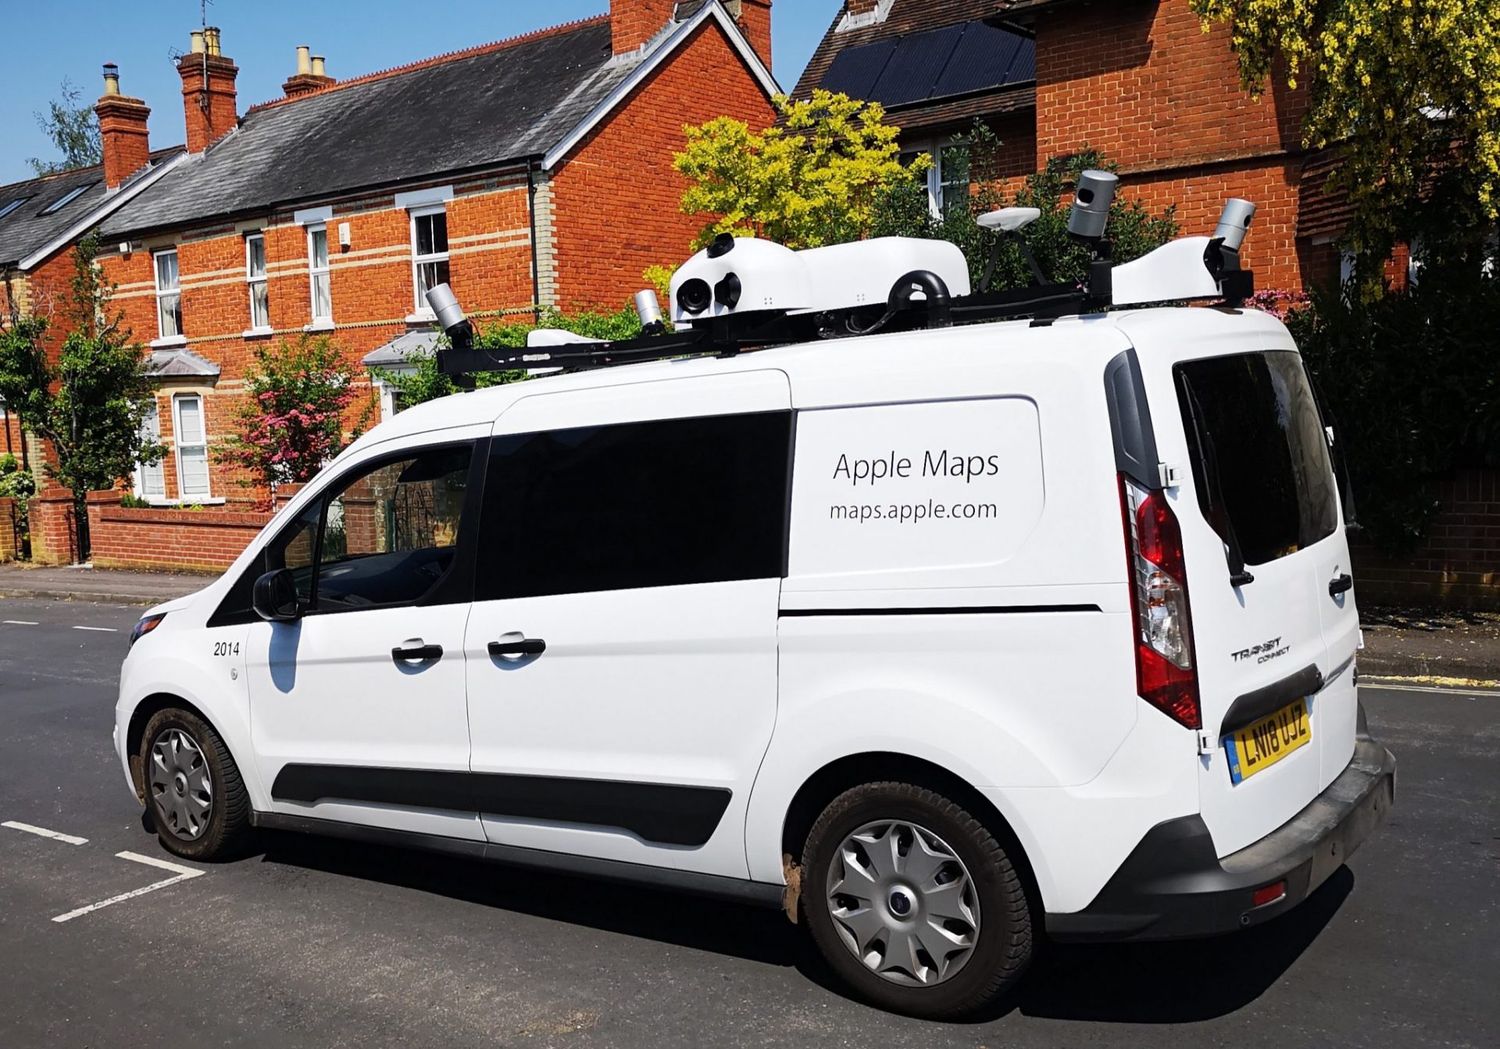 apple-maps-vans-have-been-spotted-around-the-clock